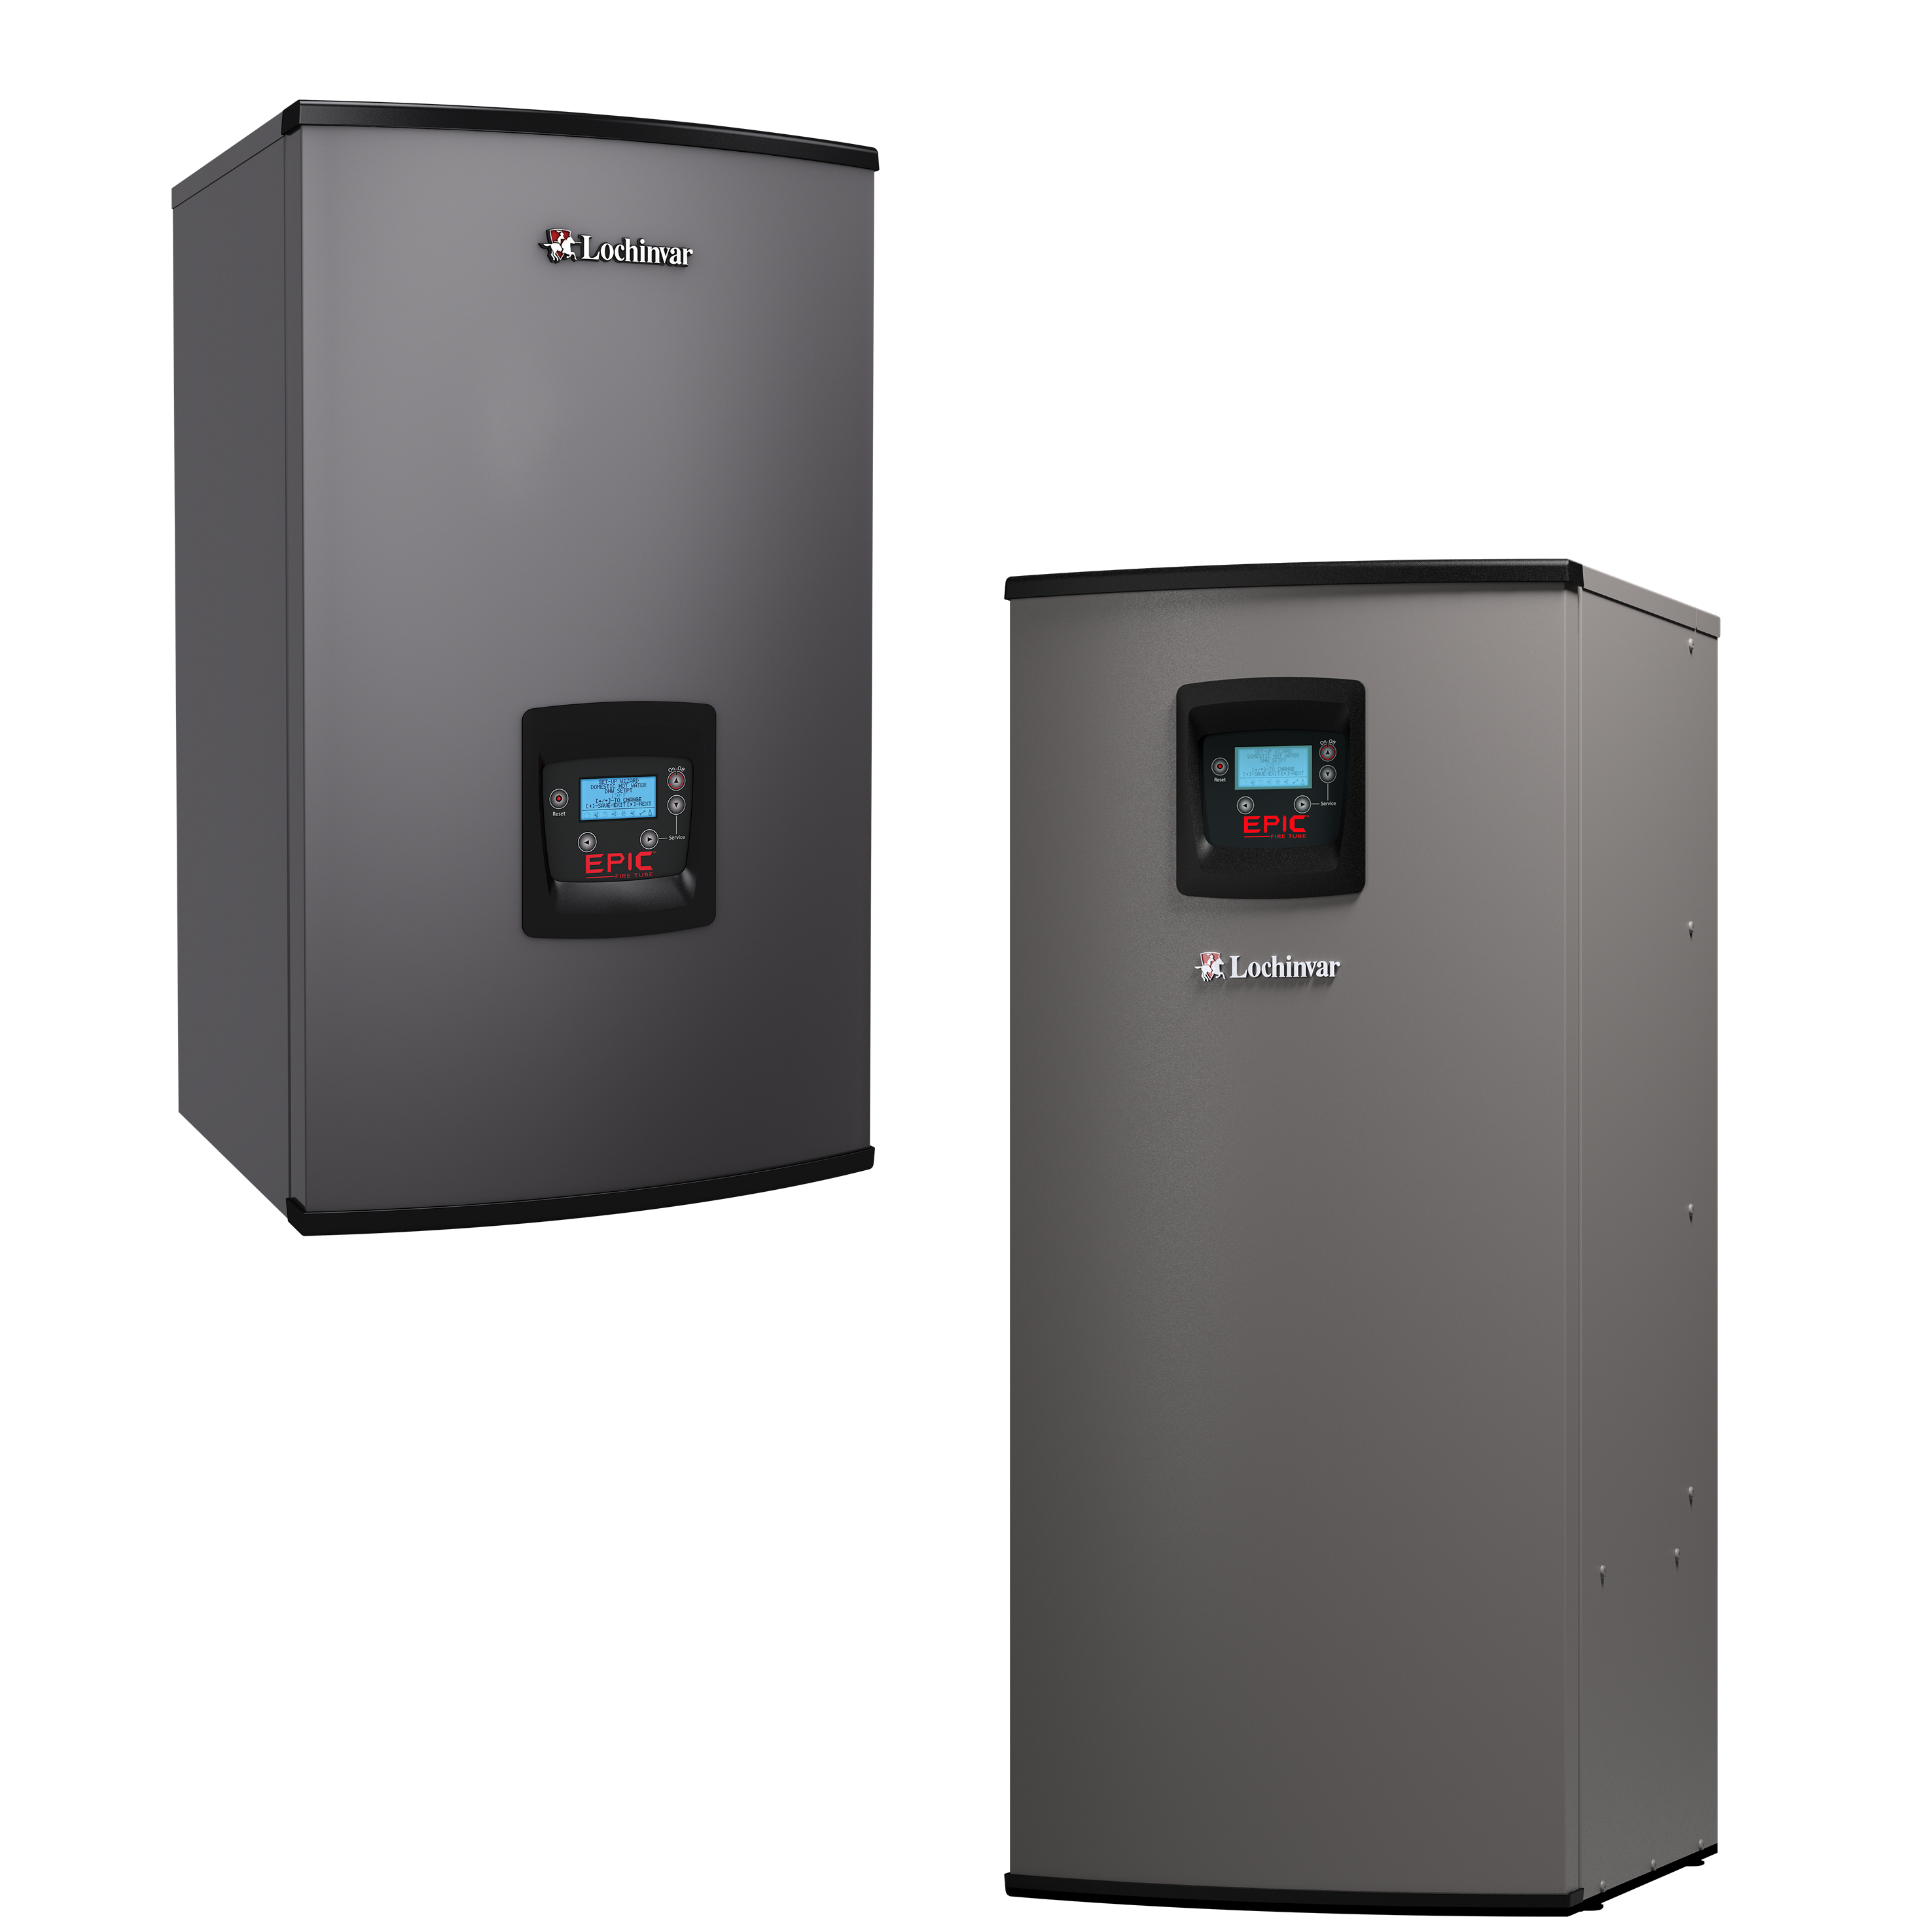 EPIC® Fire Tube Combination Gas Boiler / Space Heating Appliance